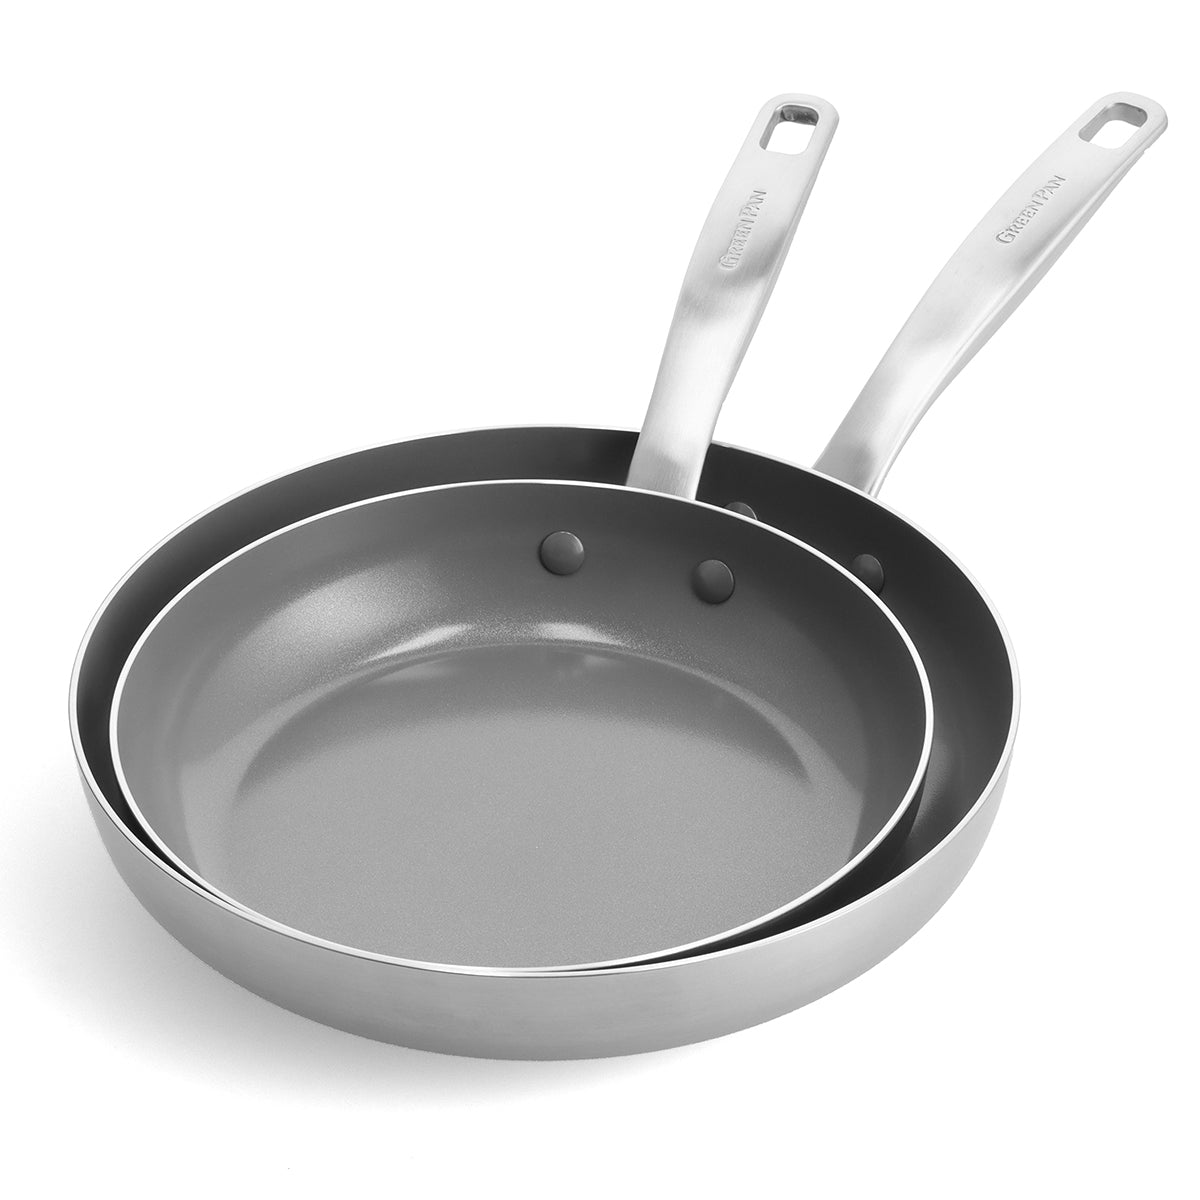 Cooks Stainless Steel 2-pc. Frypan Set, Color: Stainless Steel